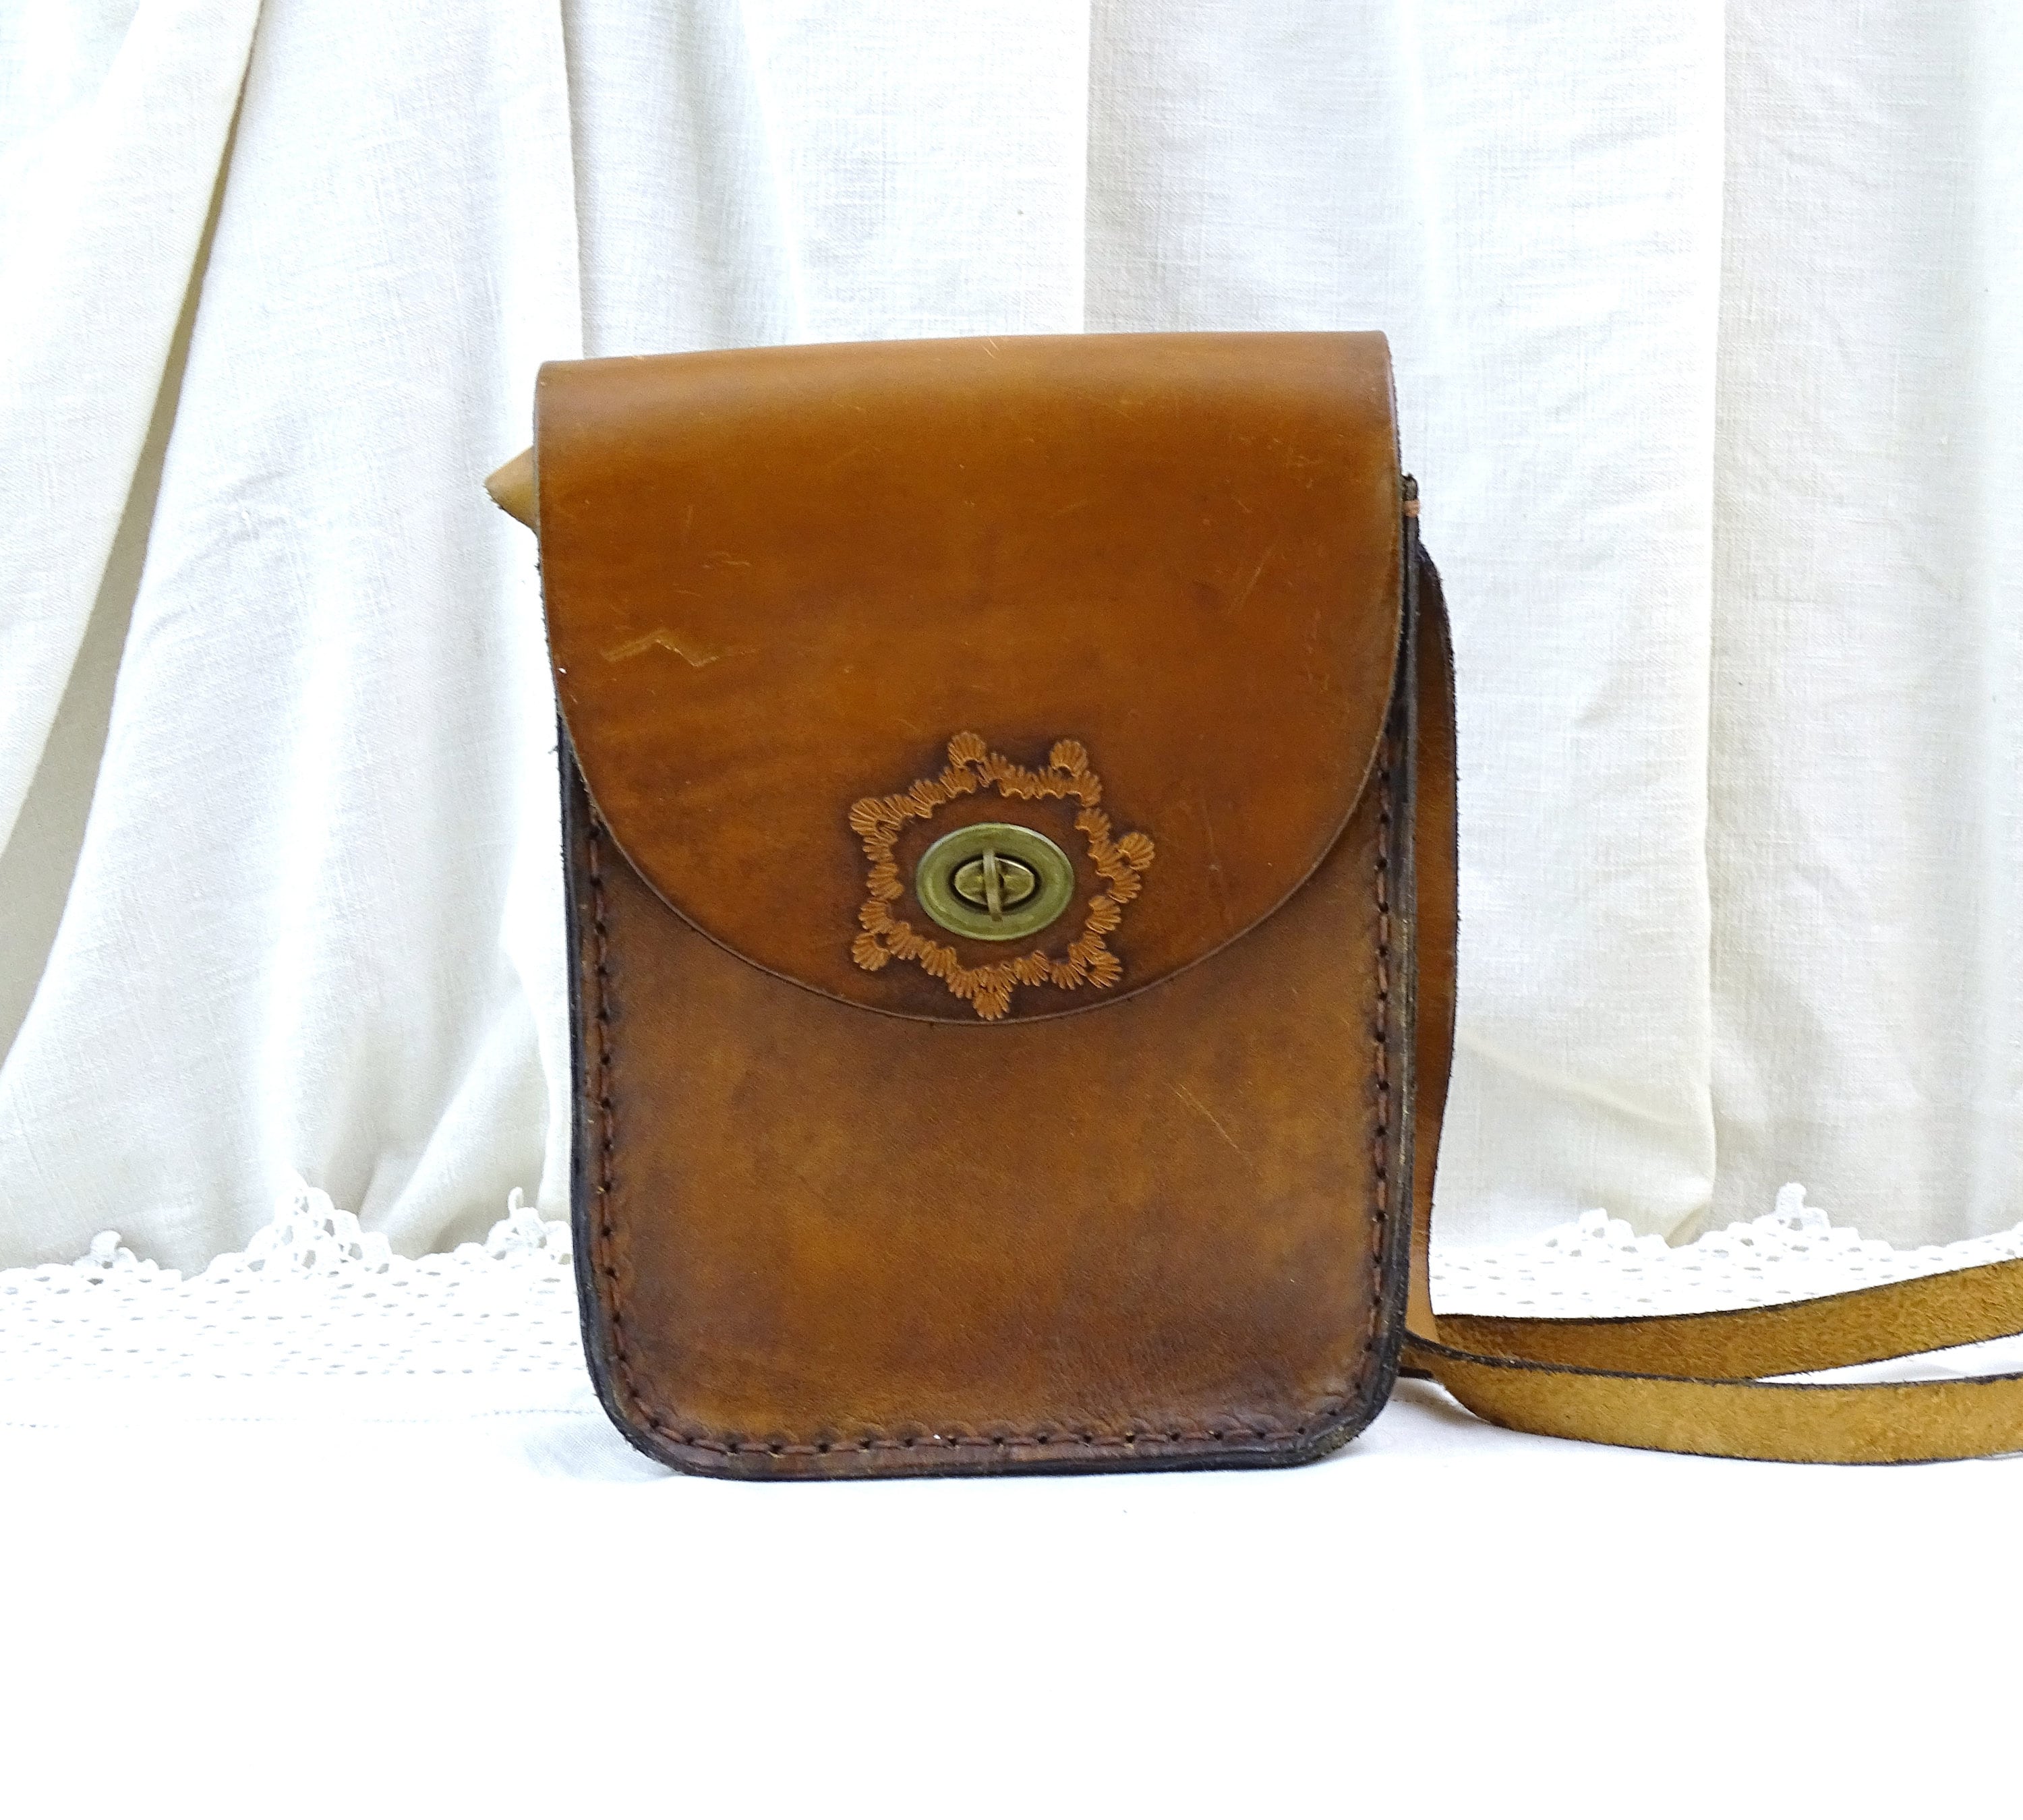 French Vintage Brown Golden Lock Leather Bag - Shop At Granny's Handbags &  Totes - Pinkoi